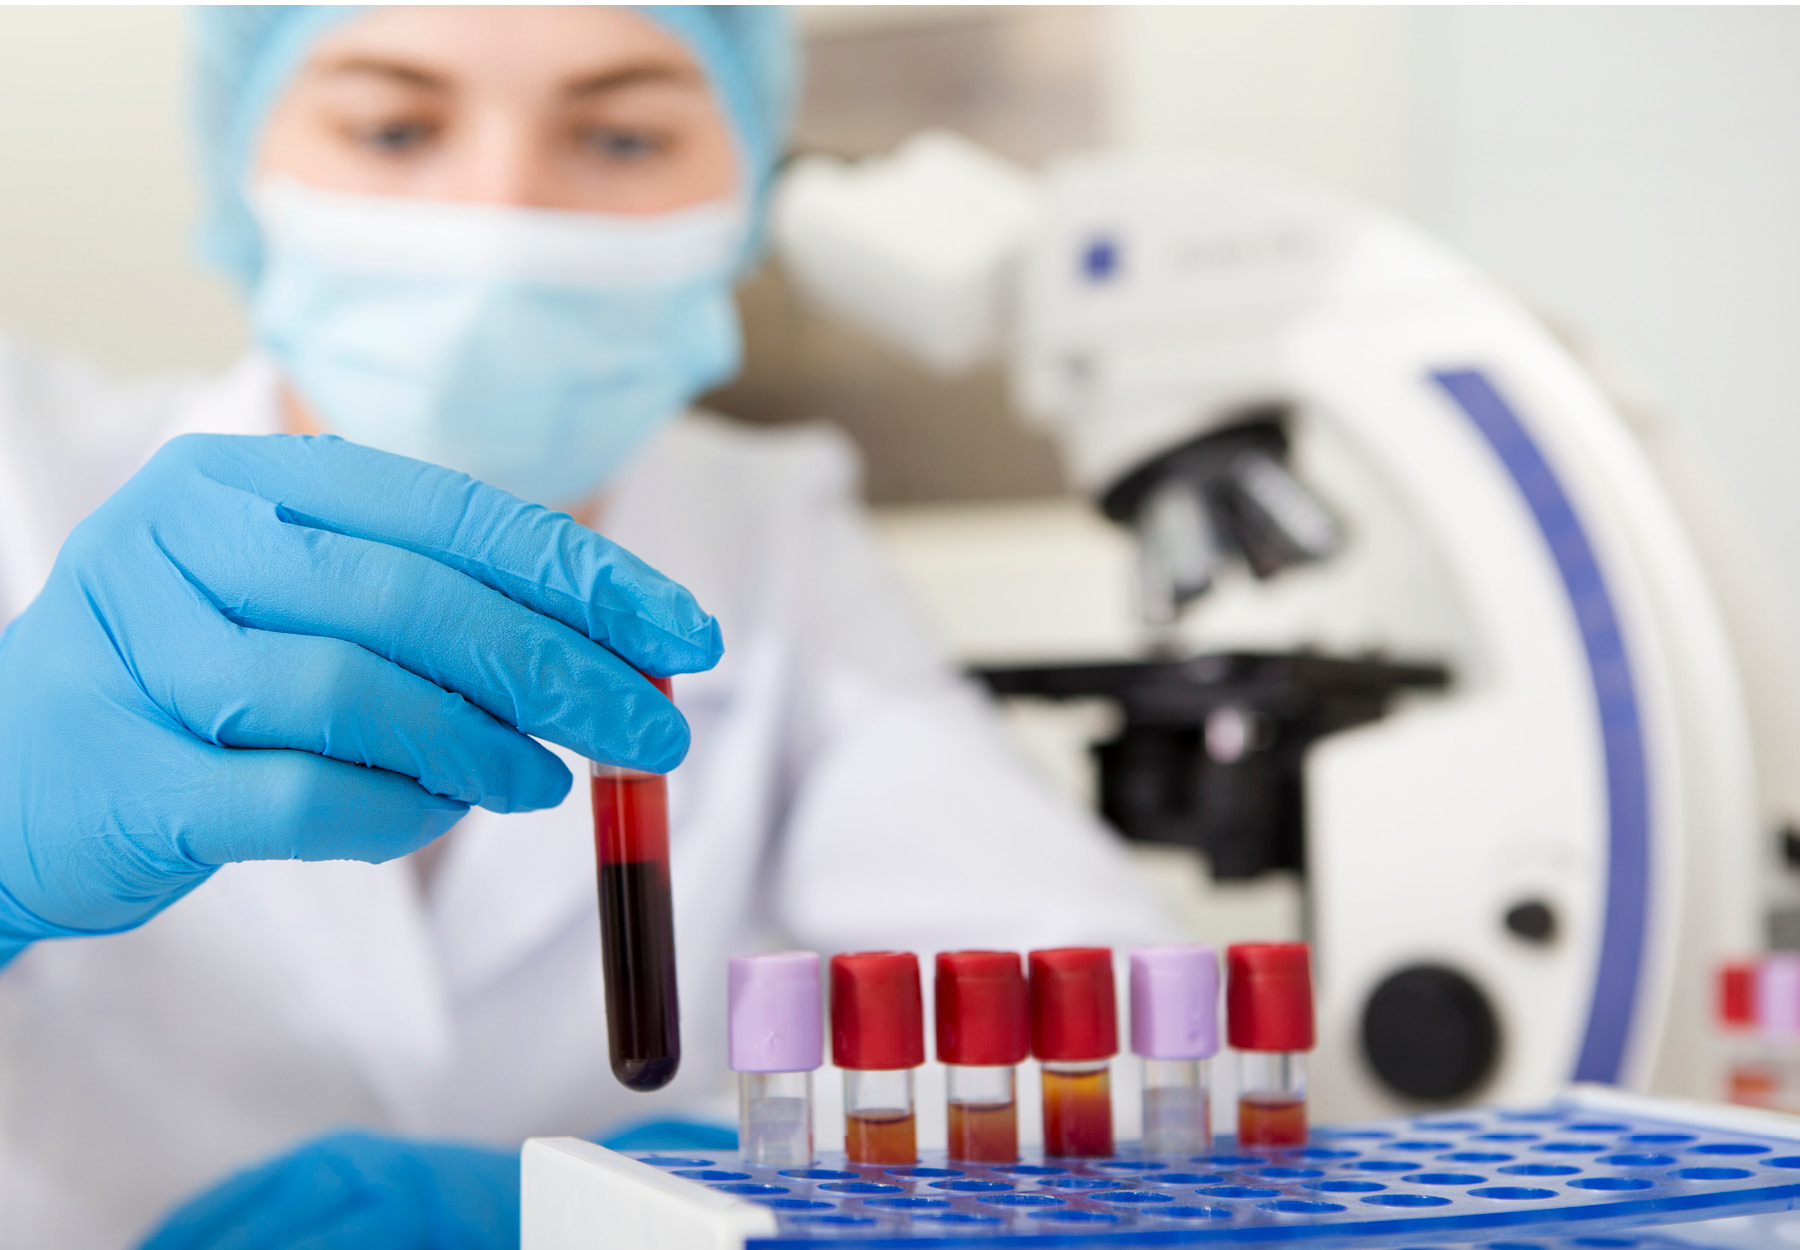 Laboratory technician working with blood samples. iStock image.